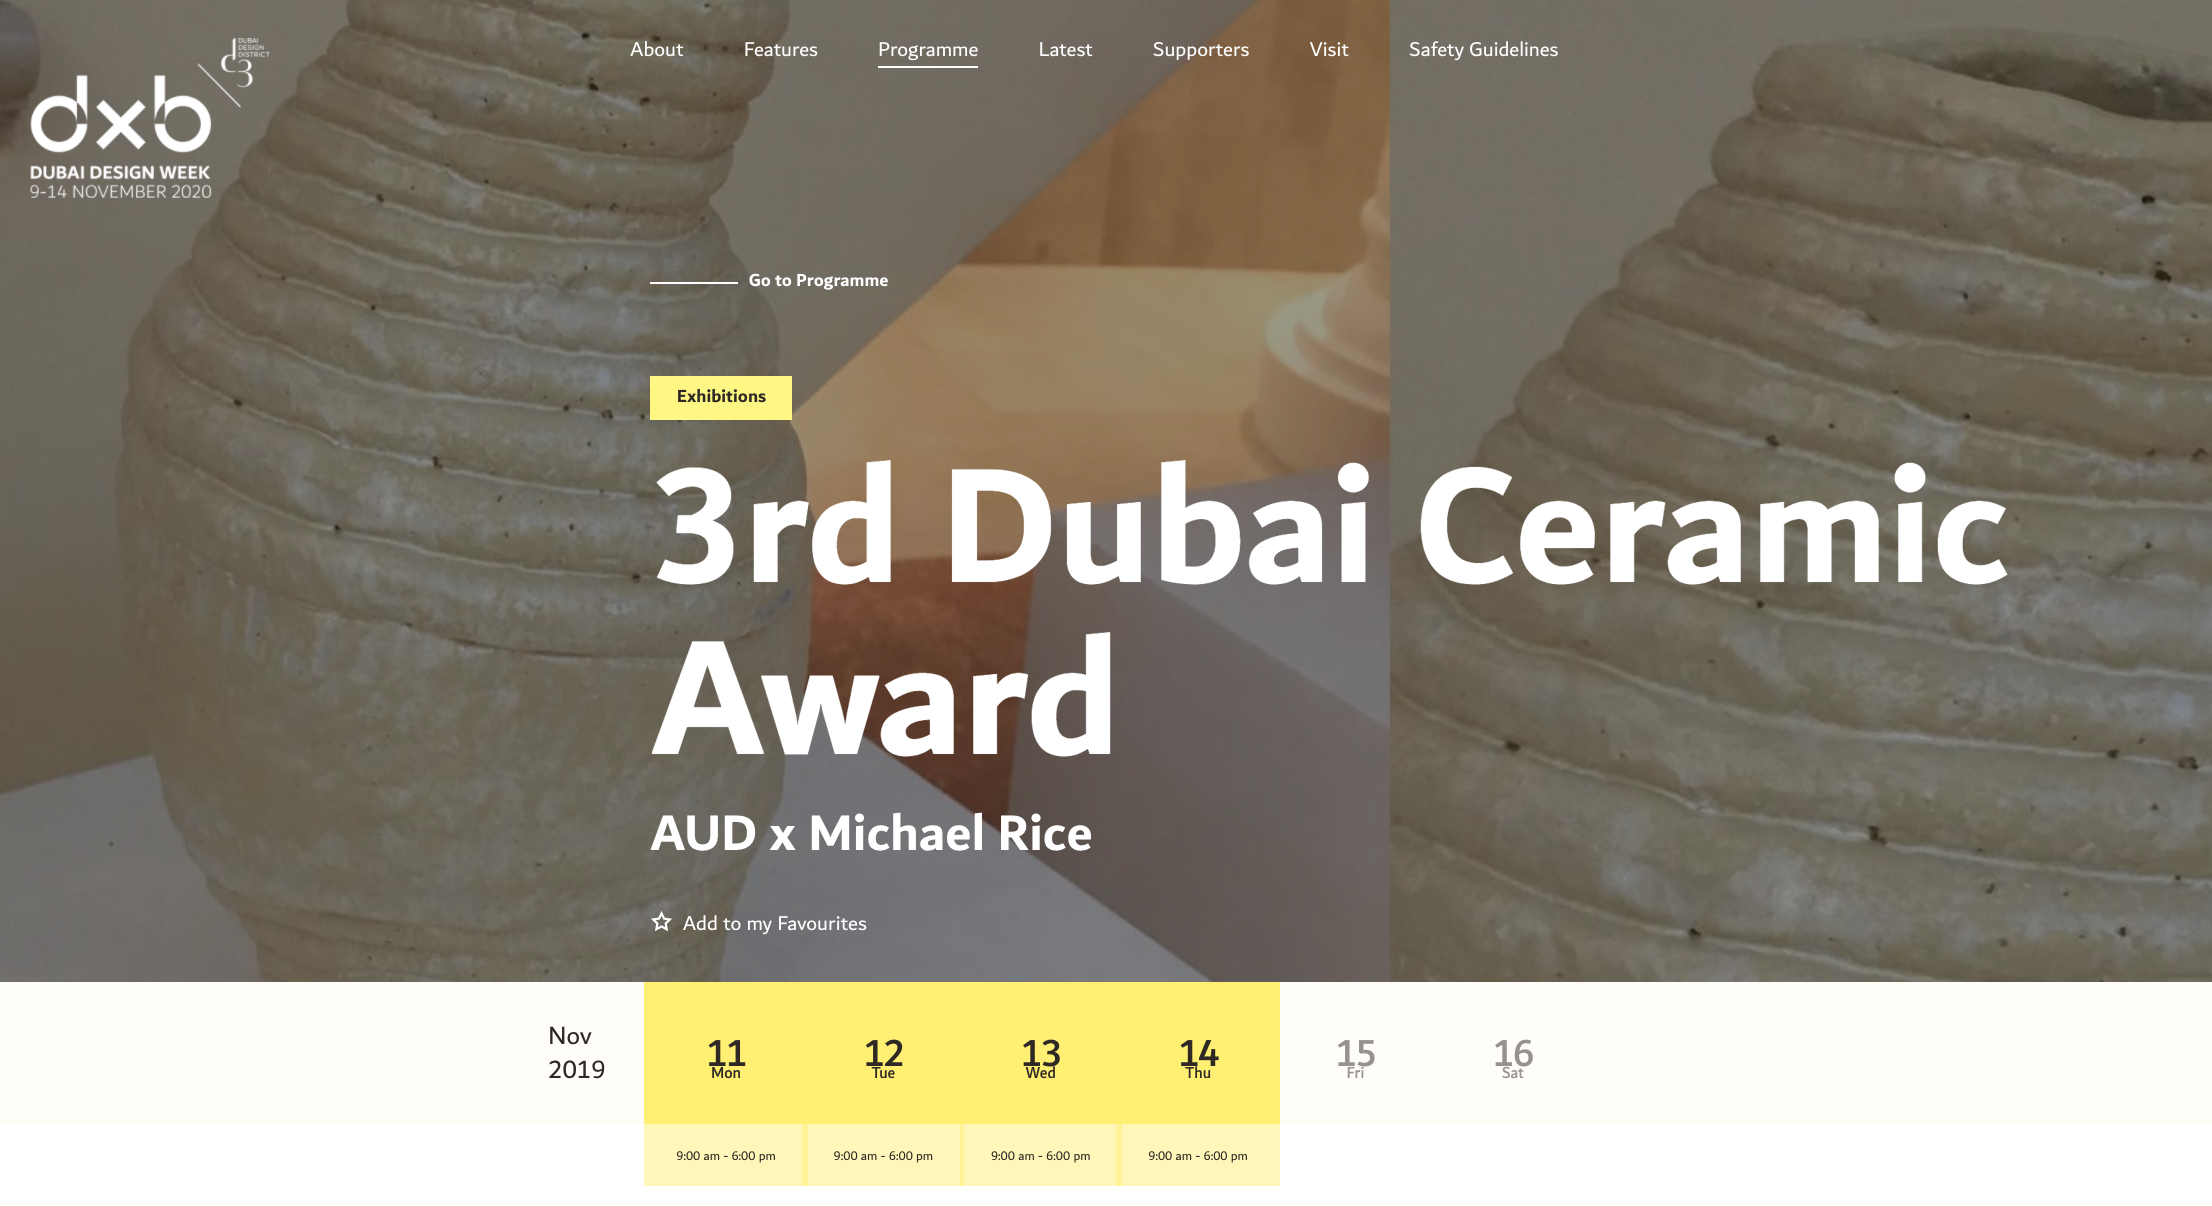  The 3rd Dubai Ceramic Award. An exhibition of the Dubai Ceramic Award finalists and awards ceremony held at AUD, showcasing the growing interest in clay culture in the region. 